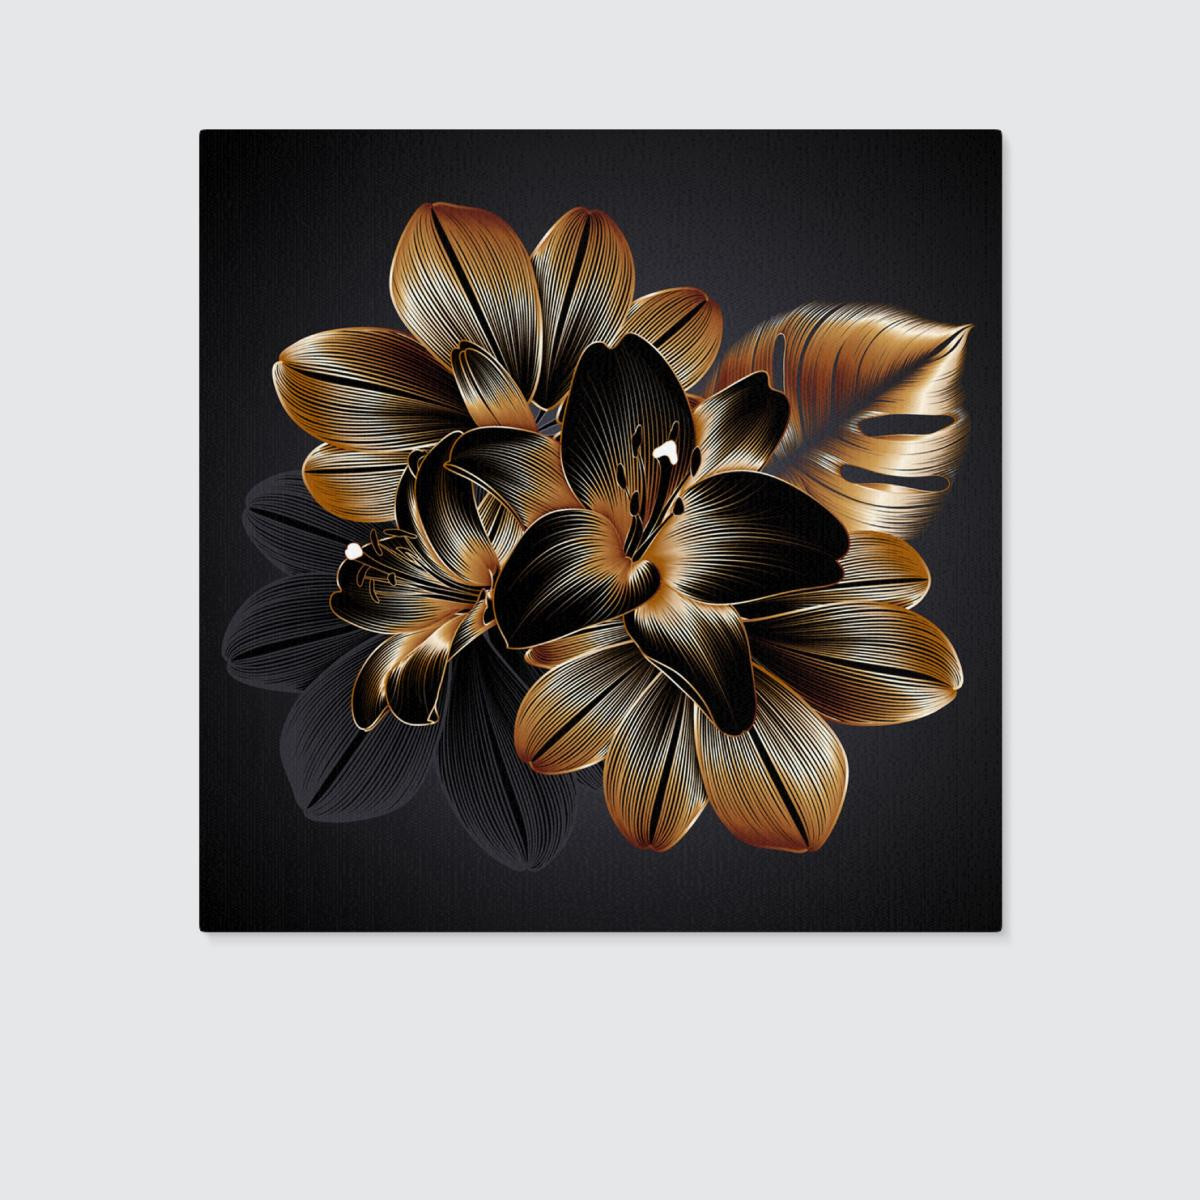 Black And Gold, Luxury Background, Floral Shapes, Black Silk Texture With Golden Motifs Square Canvas